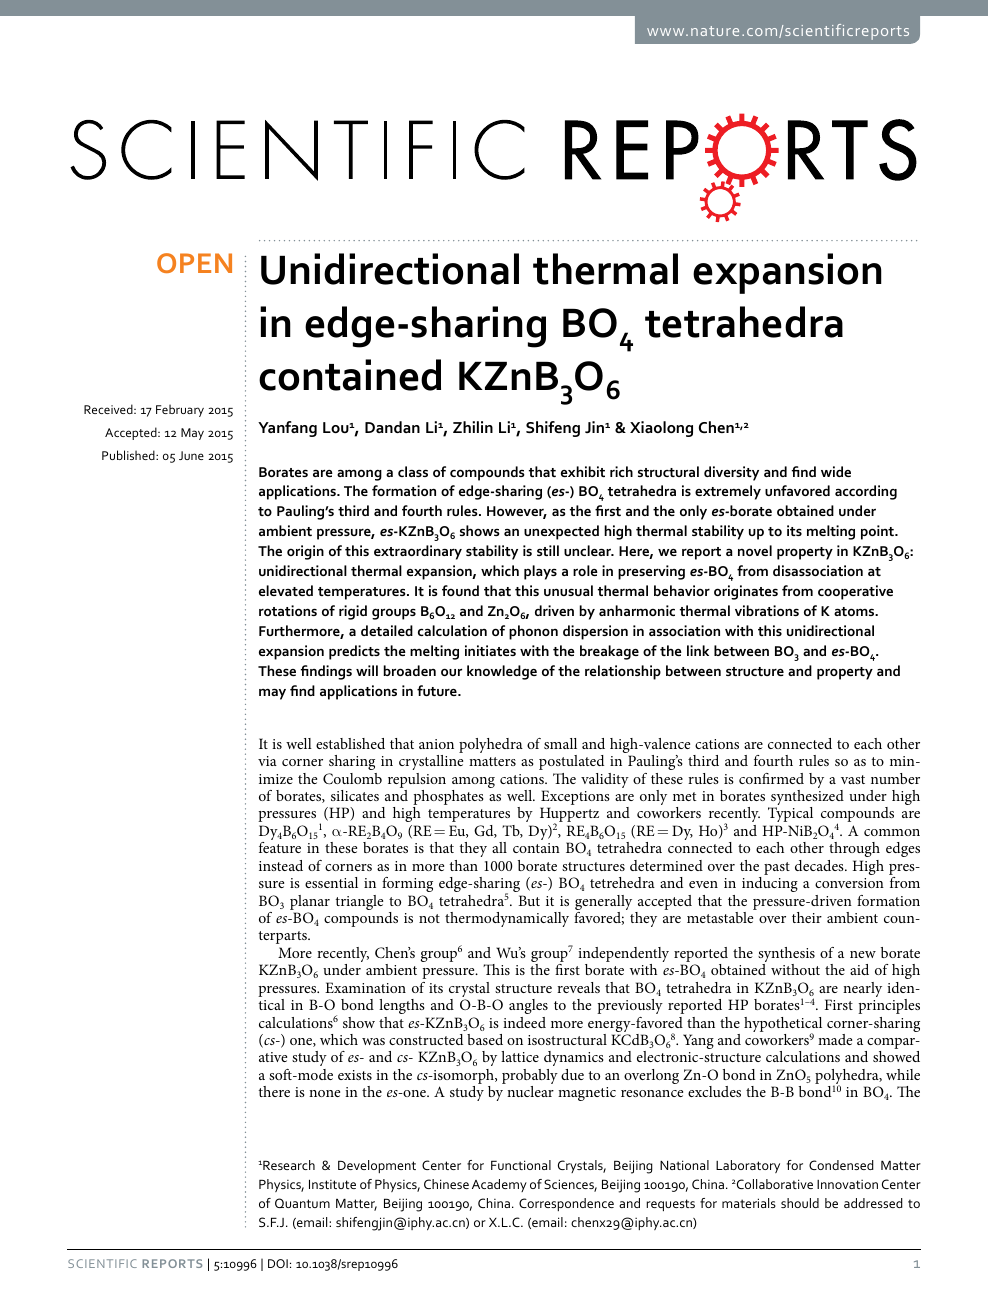 Unidirectional Thermal Expansion In Edge Sharing Bo4 Tetrahedra Contained Kznb3o6 Topic Of Research Paper In Chemical Sciences Download Scholarly Article Pdf And Read For Free On Cyberleninka Open Science Hub